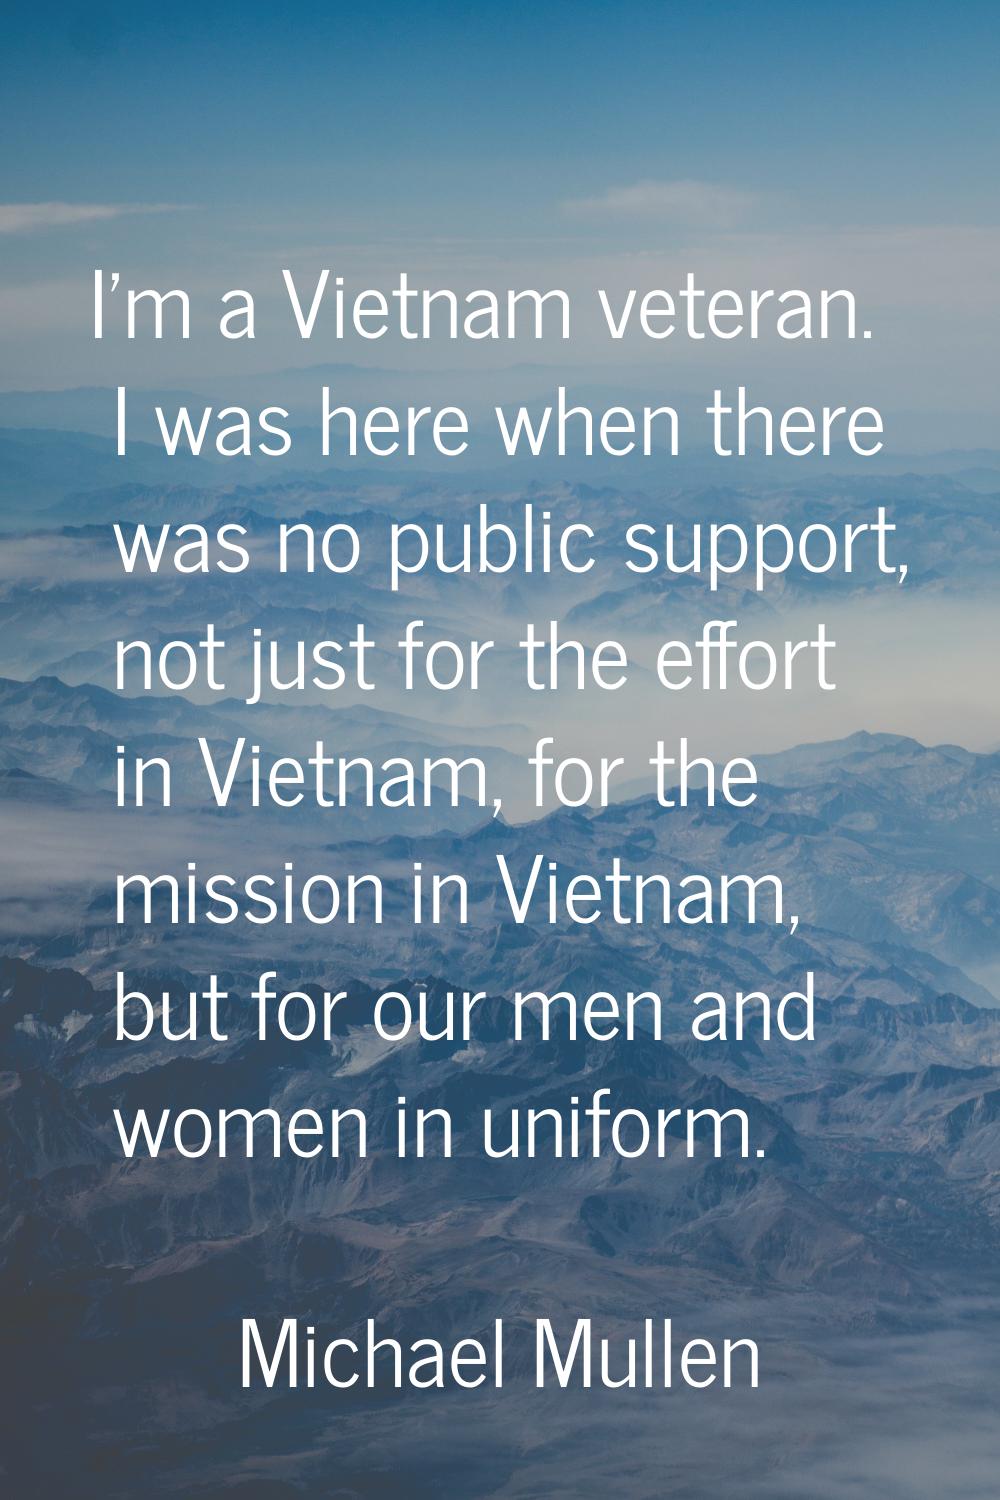 I'm a Vietnam veteran. I was here when there was no public support, not just for the effort in Viet